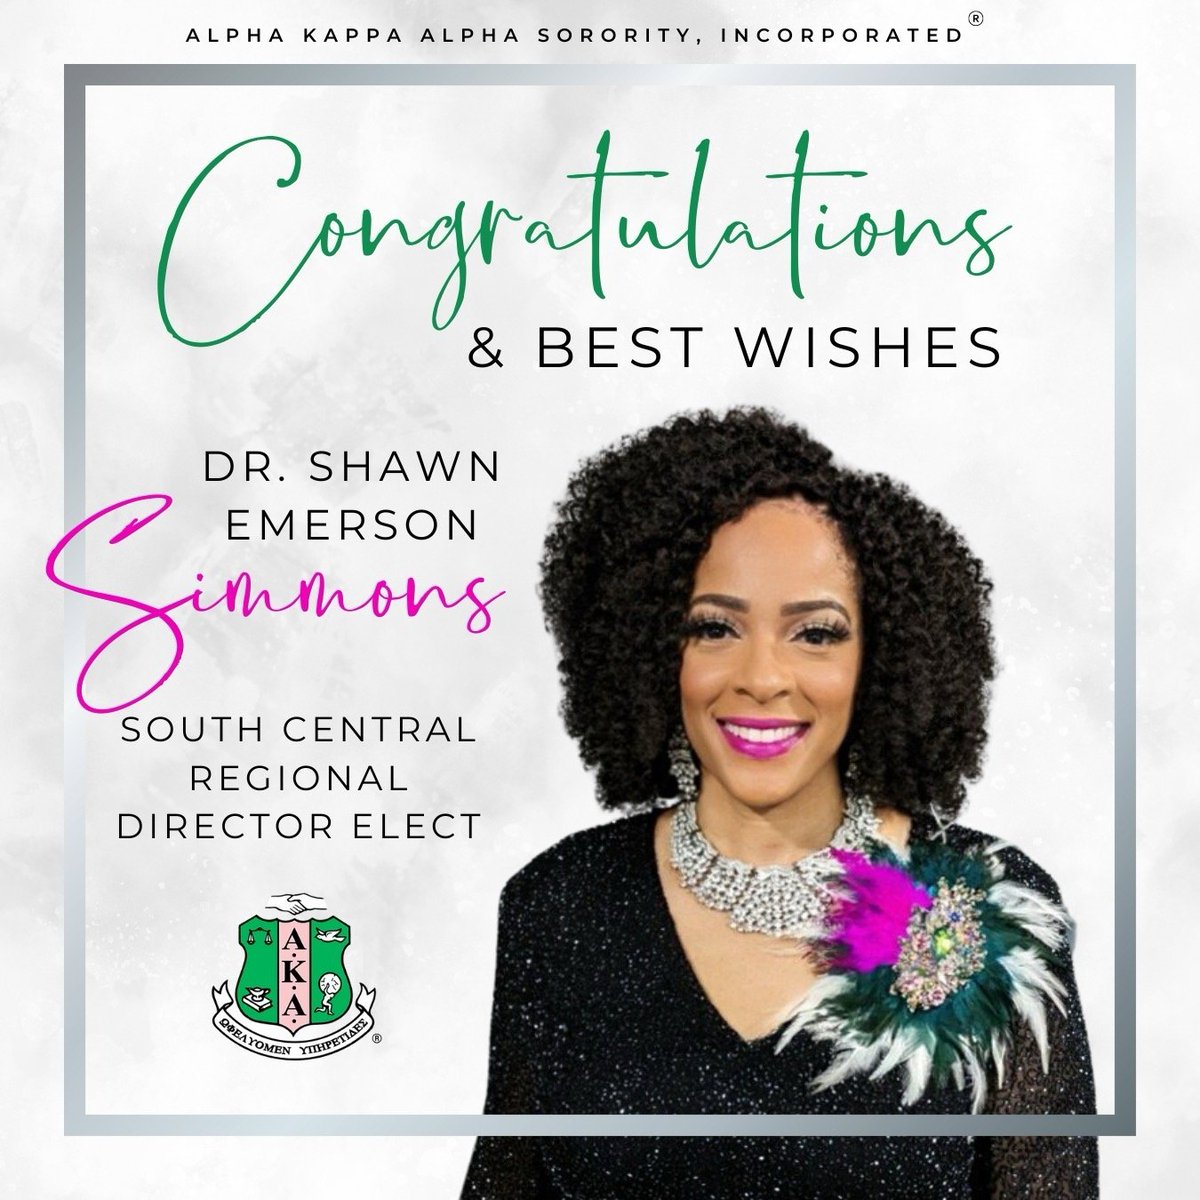 Congratulations to our South Central Regional Director Elect Dr. Shawn Emerson Simmons! She will be ratified at the 71st Boule in July. We are ready to Soar to Greater Heights of Service and Sisterhood! #AKA1908 #92ndSCRC #TheJourneytoSoar #WeAreSouthCentral